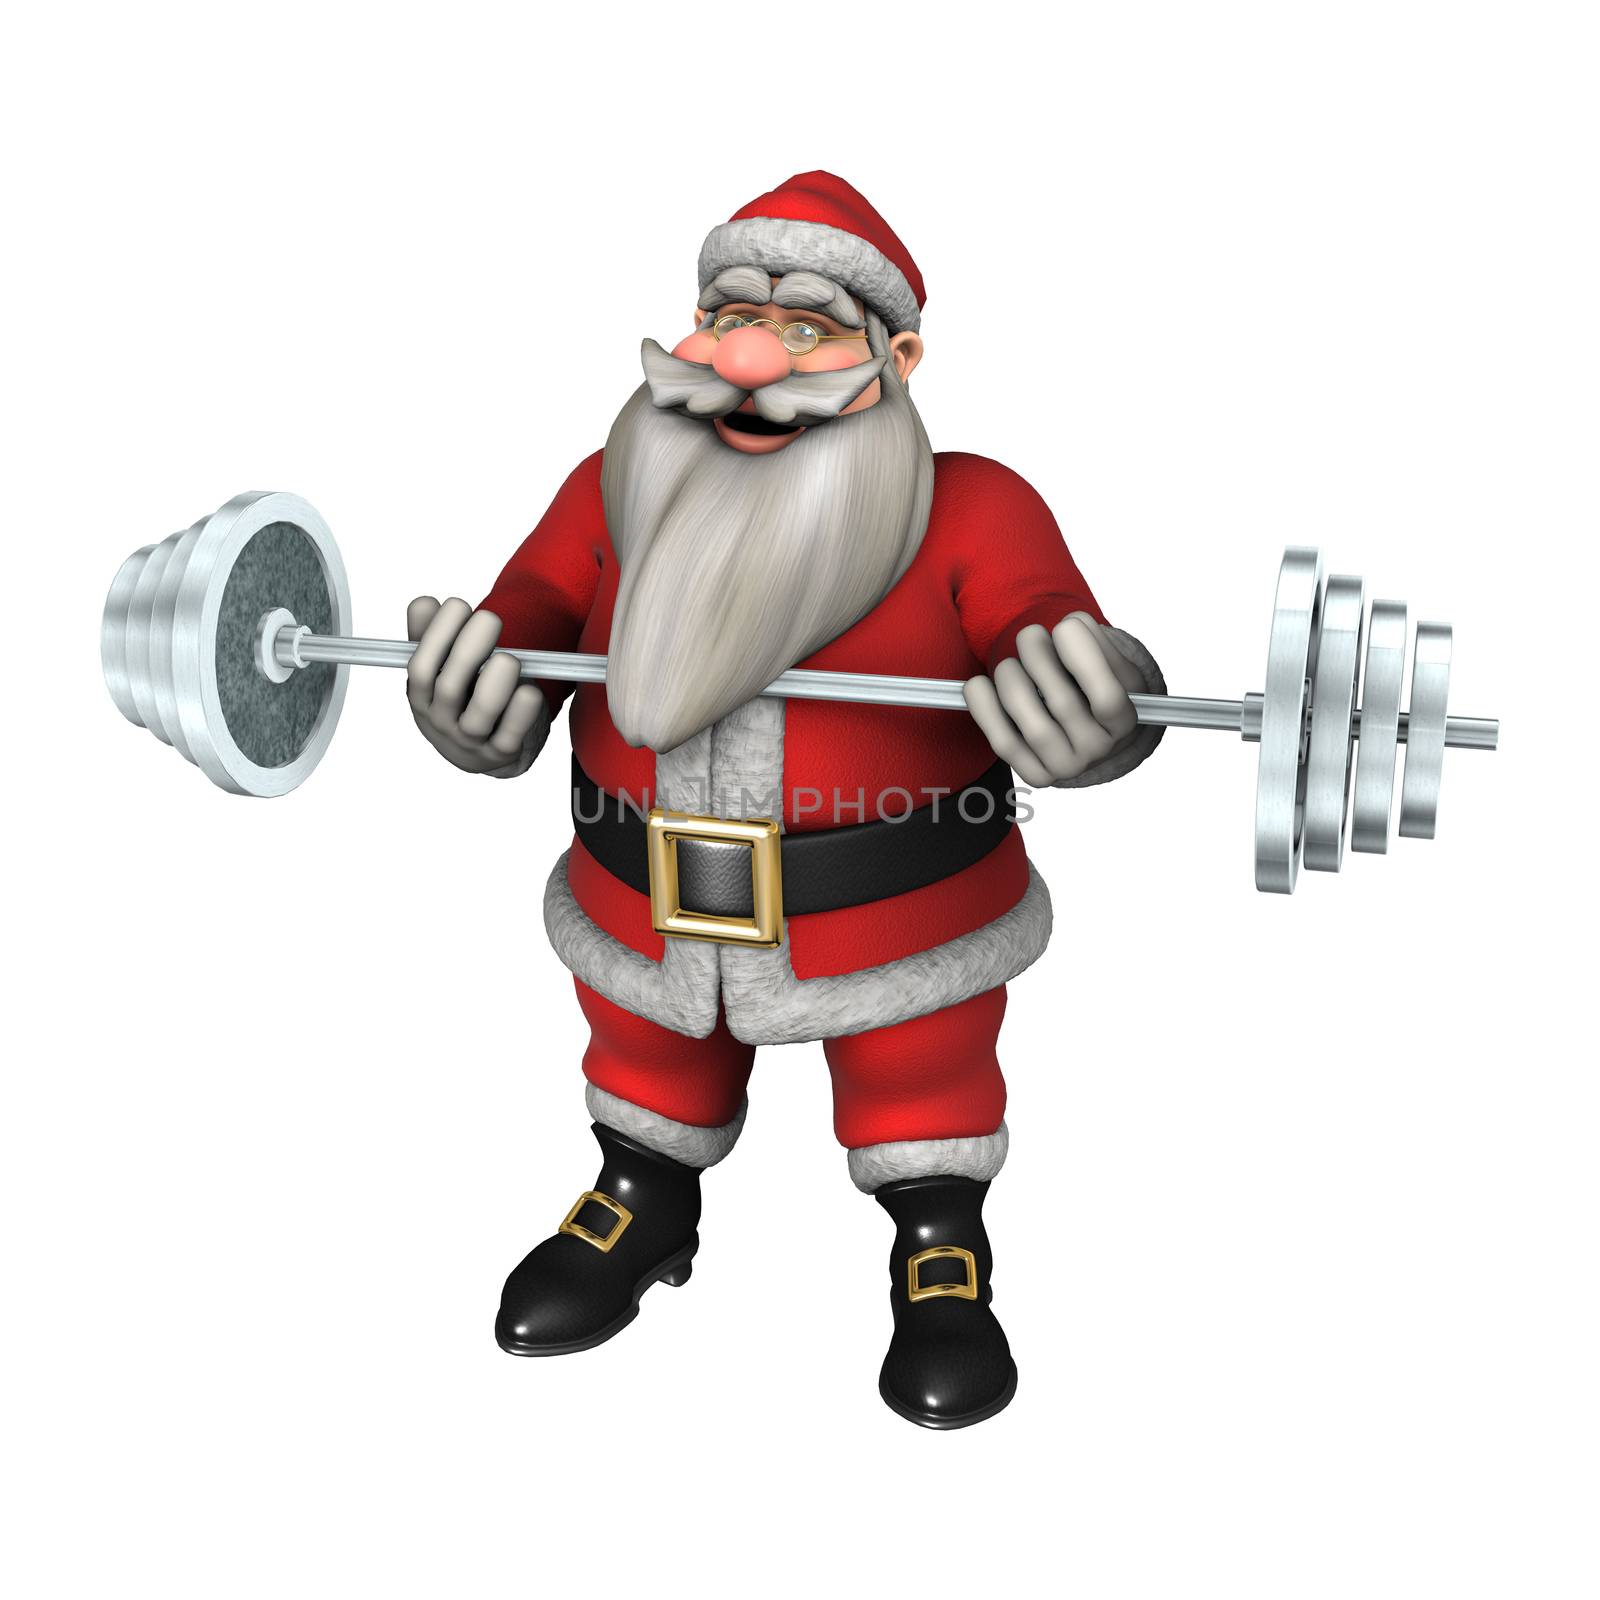 3D digital render of Santa exercising with weights isolated on white background